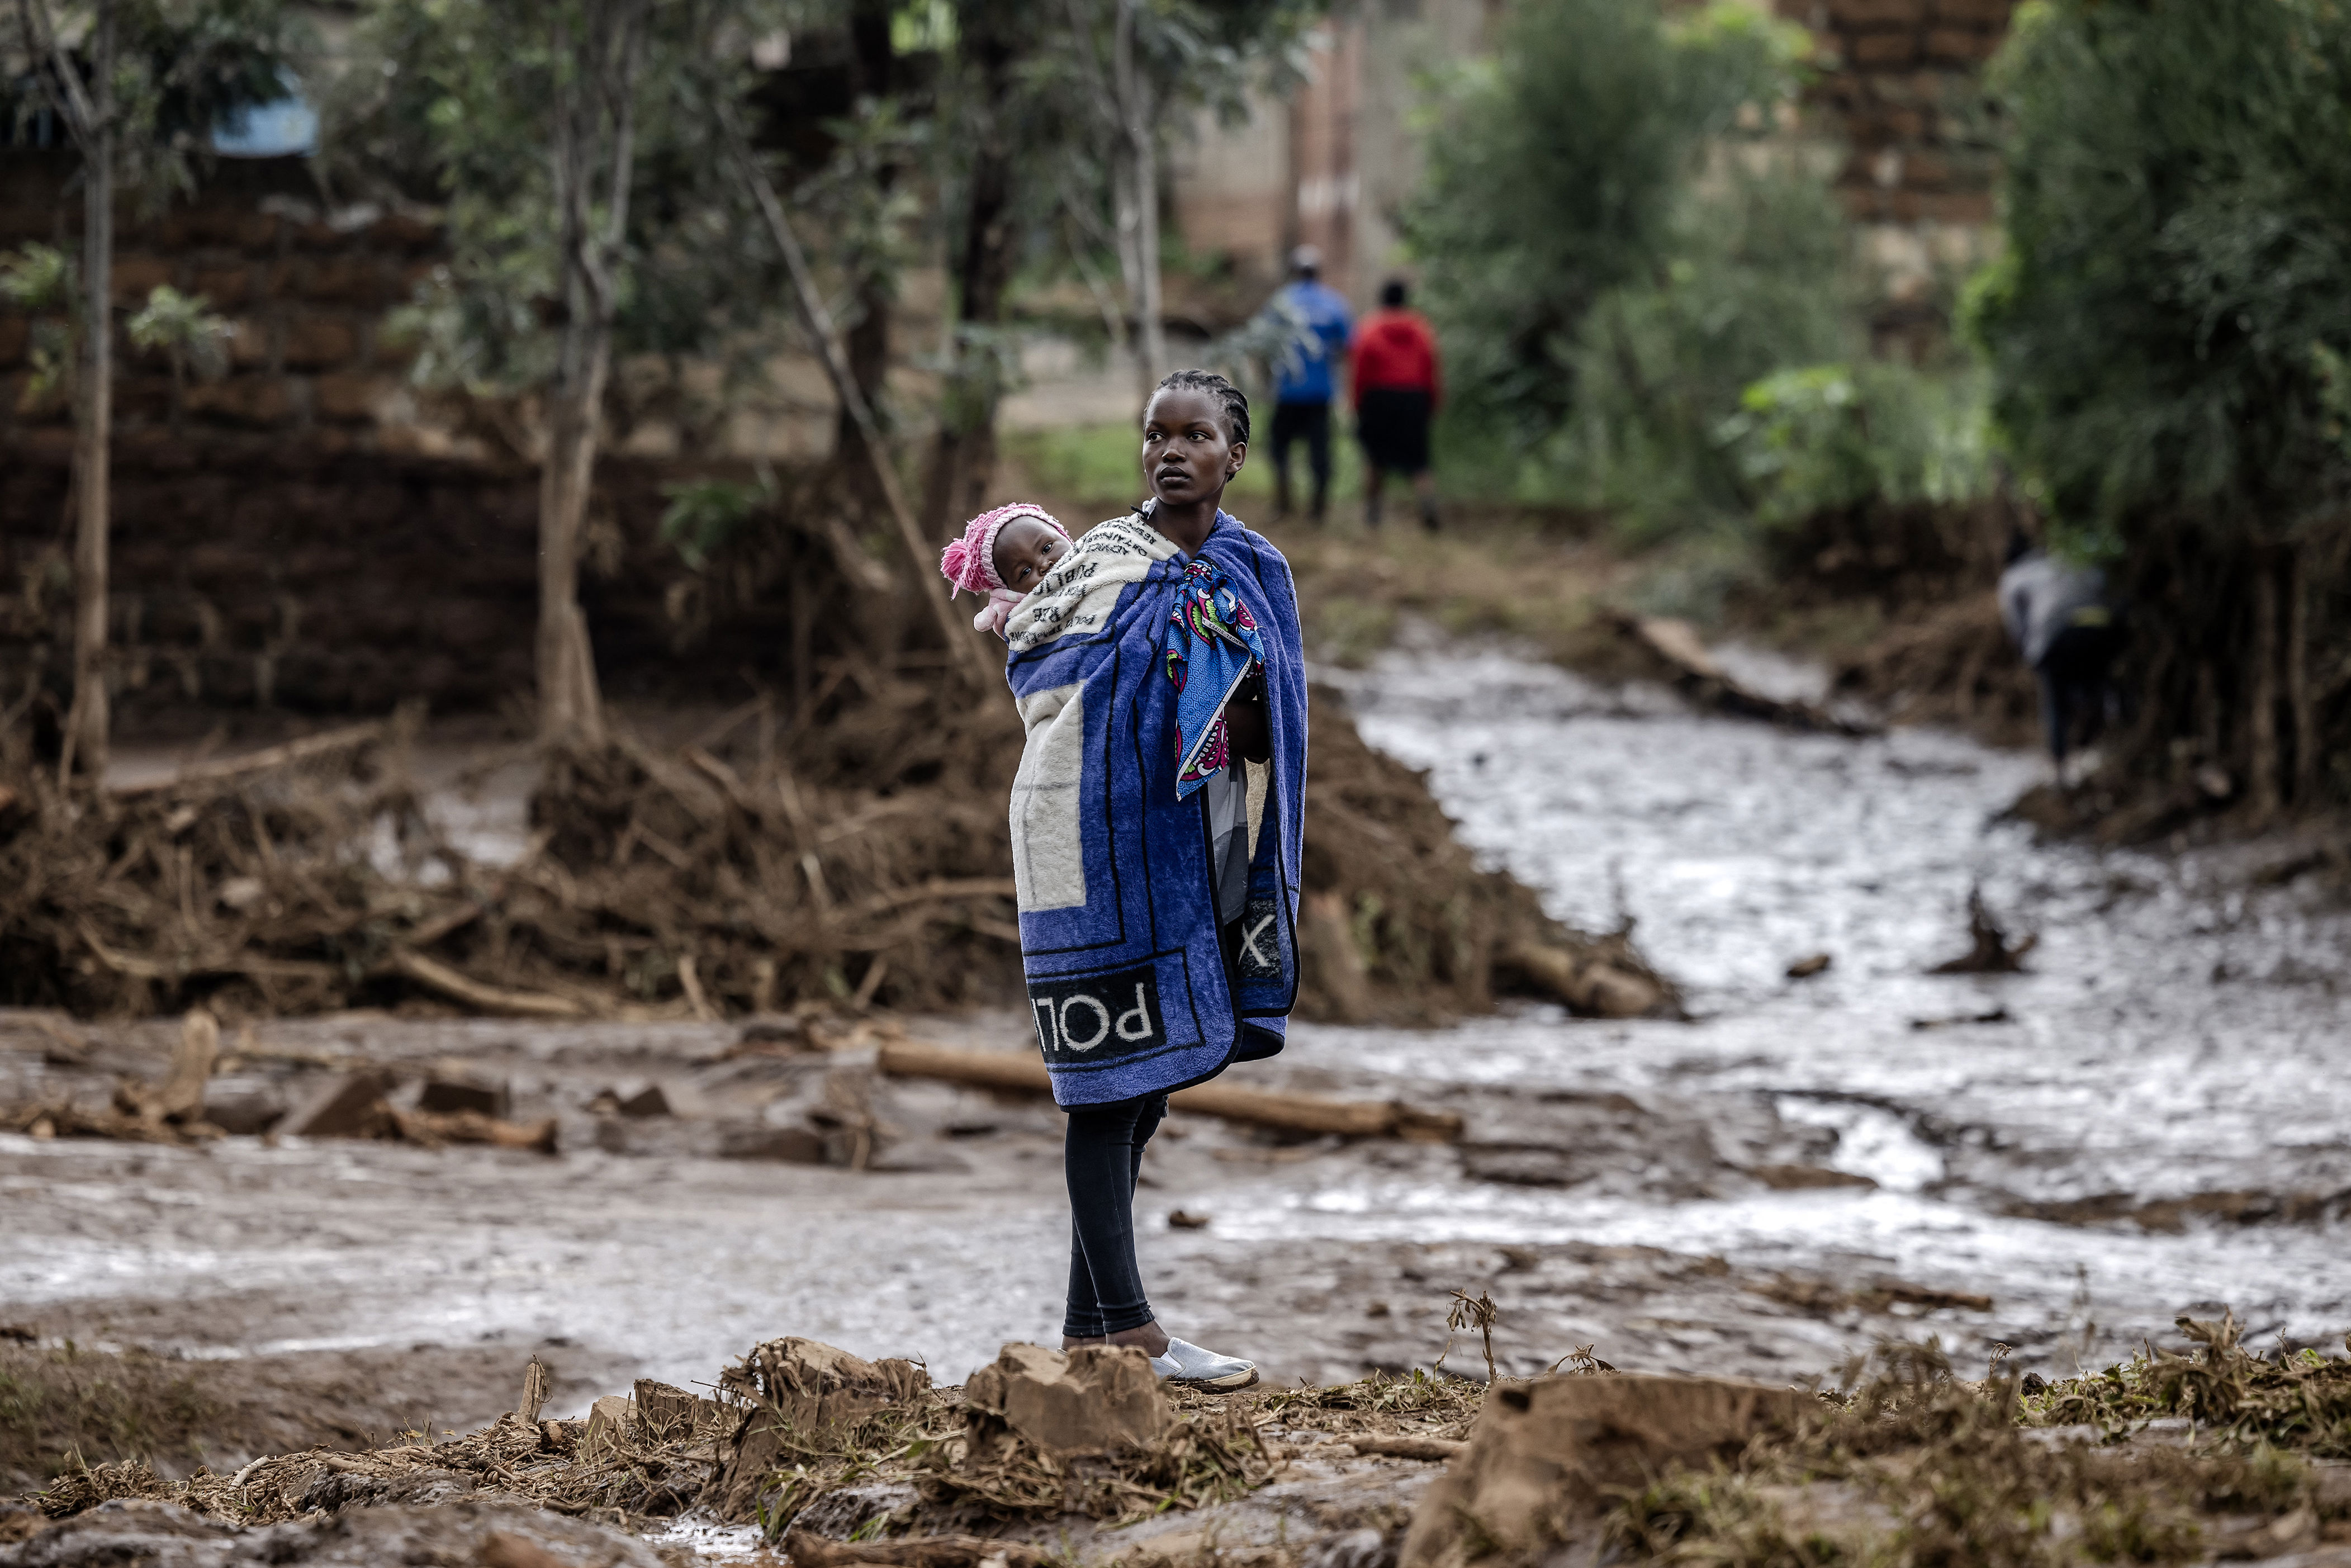 death toll reaches 181 in kenya floods amid ongoing heavy rains